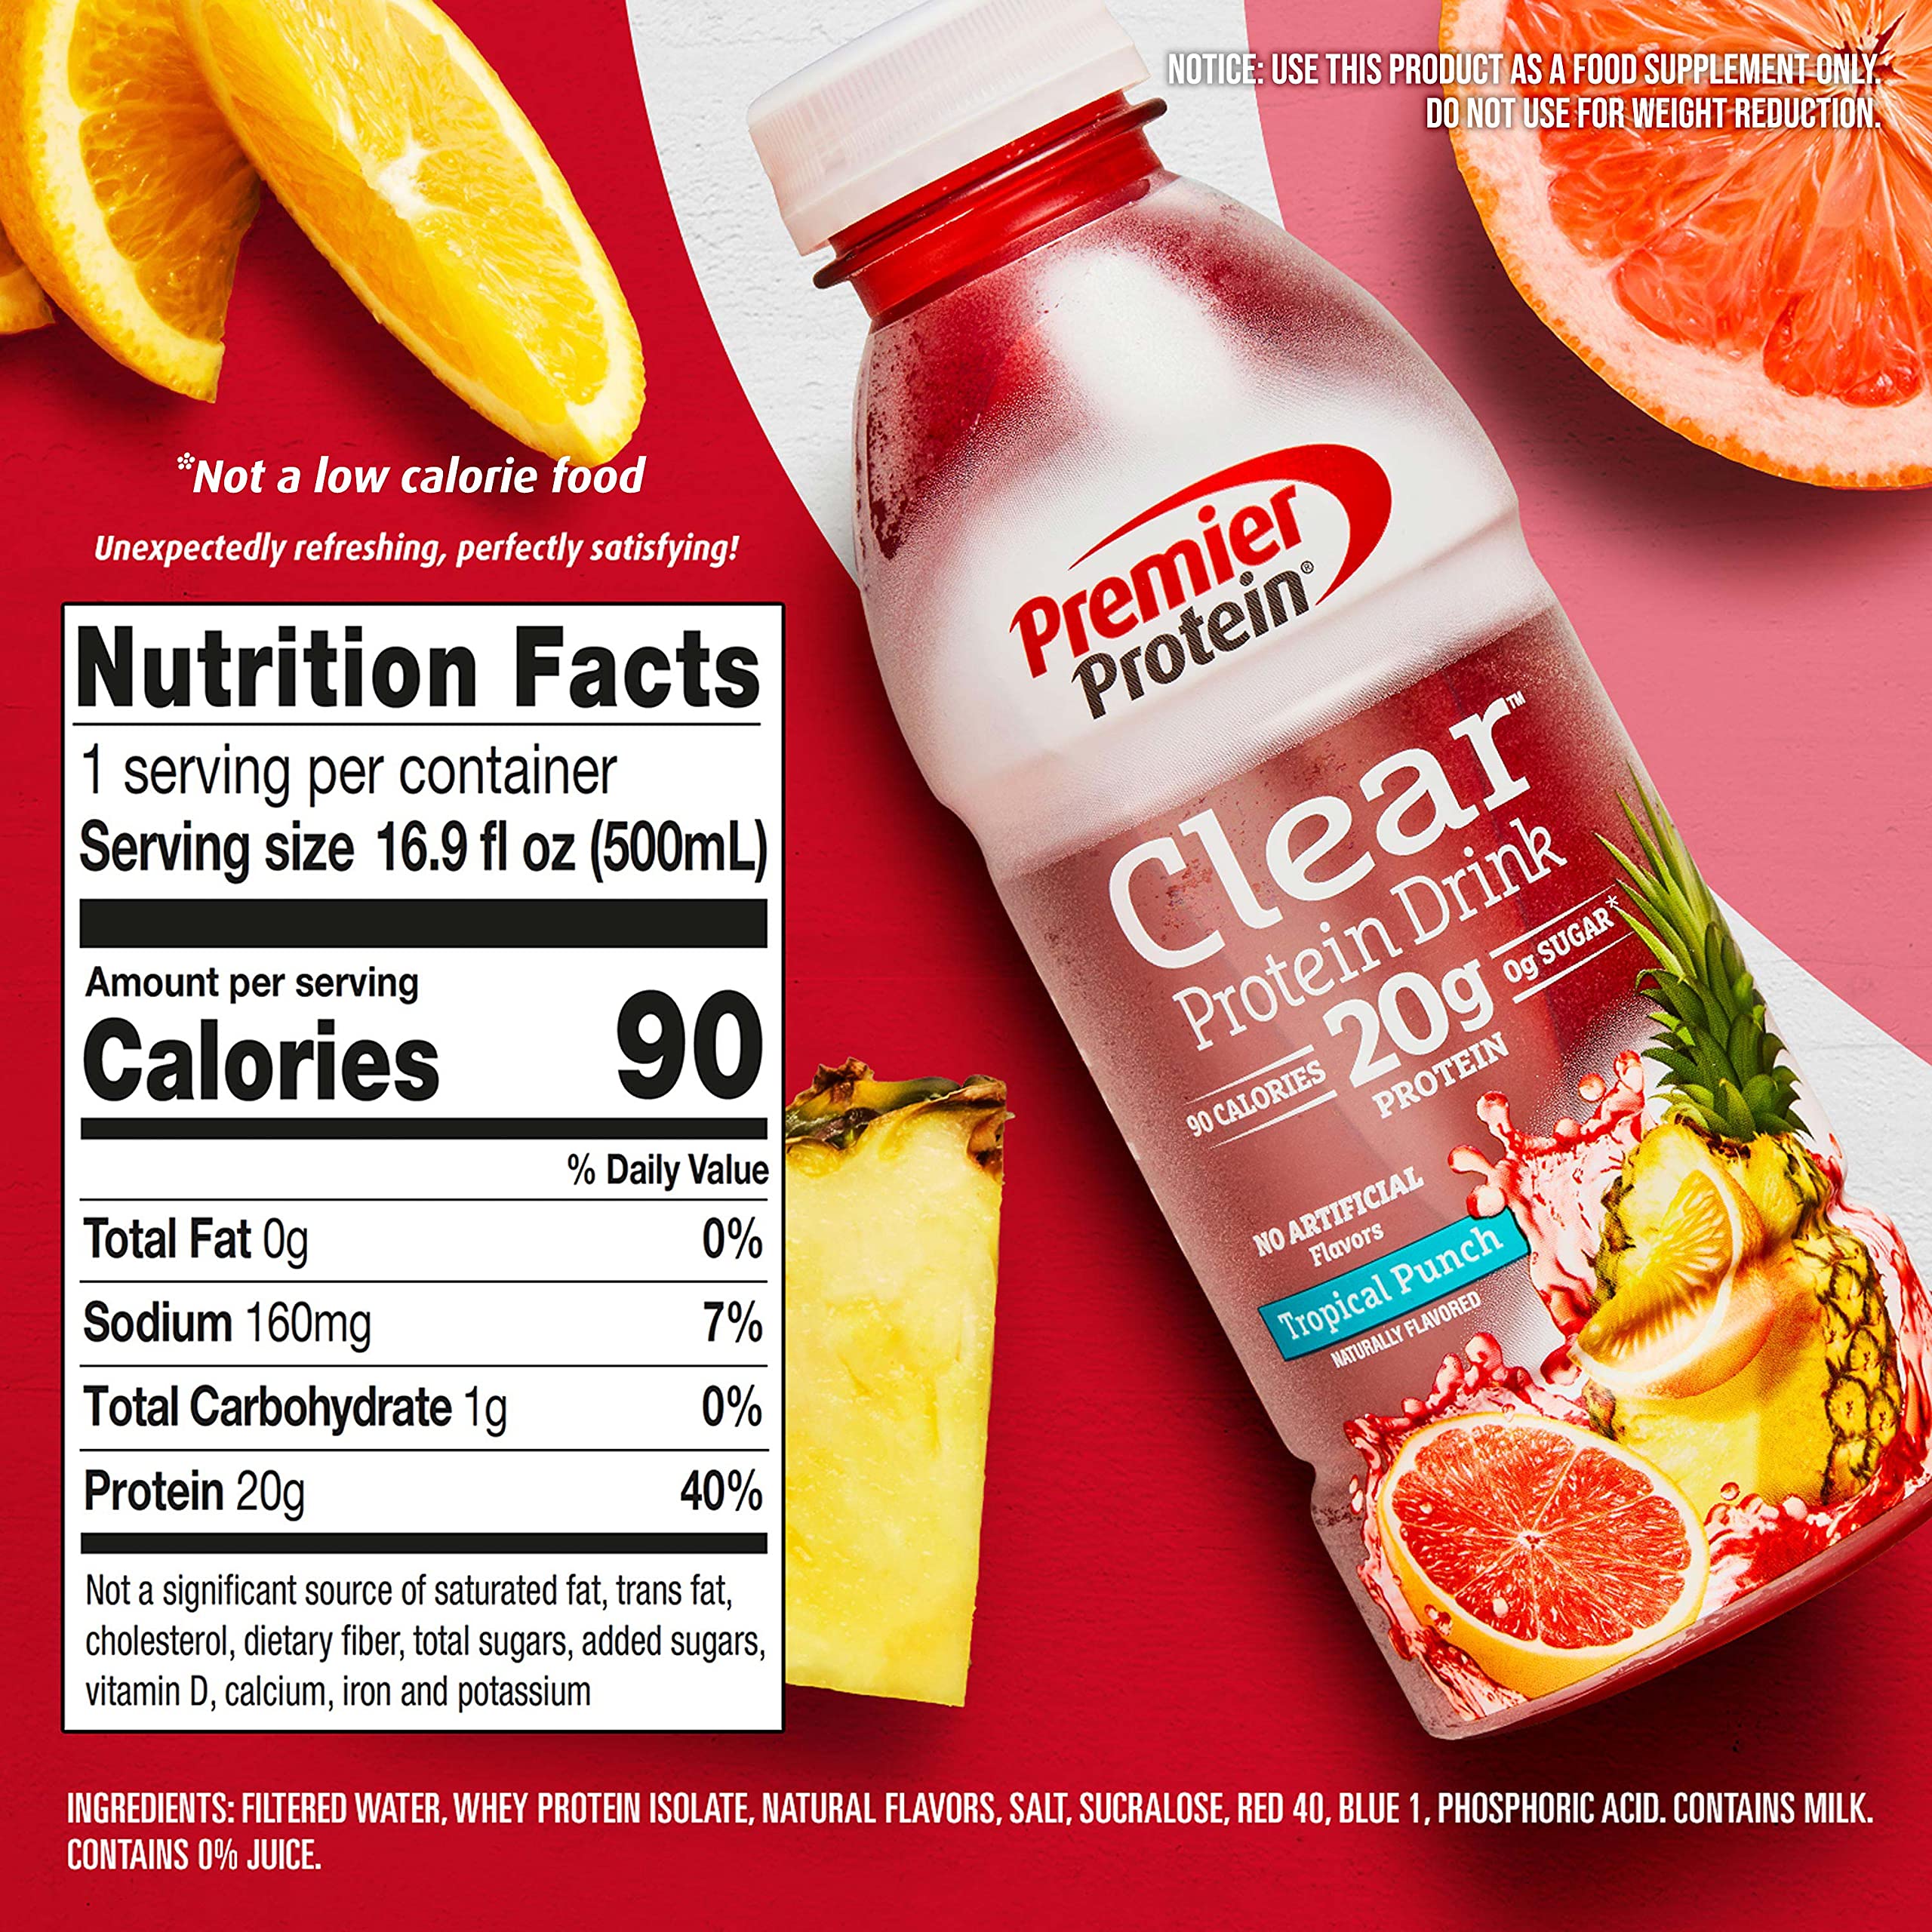 Premier Protein Clear Drink, Tropical Punch, 20g Protein, 0g Sugar, 1g Carb, 90 calories, Keto Friendly, Gluten Free, No Soy Ingredients 16.9 Fl Oz (Pack of 12)